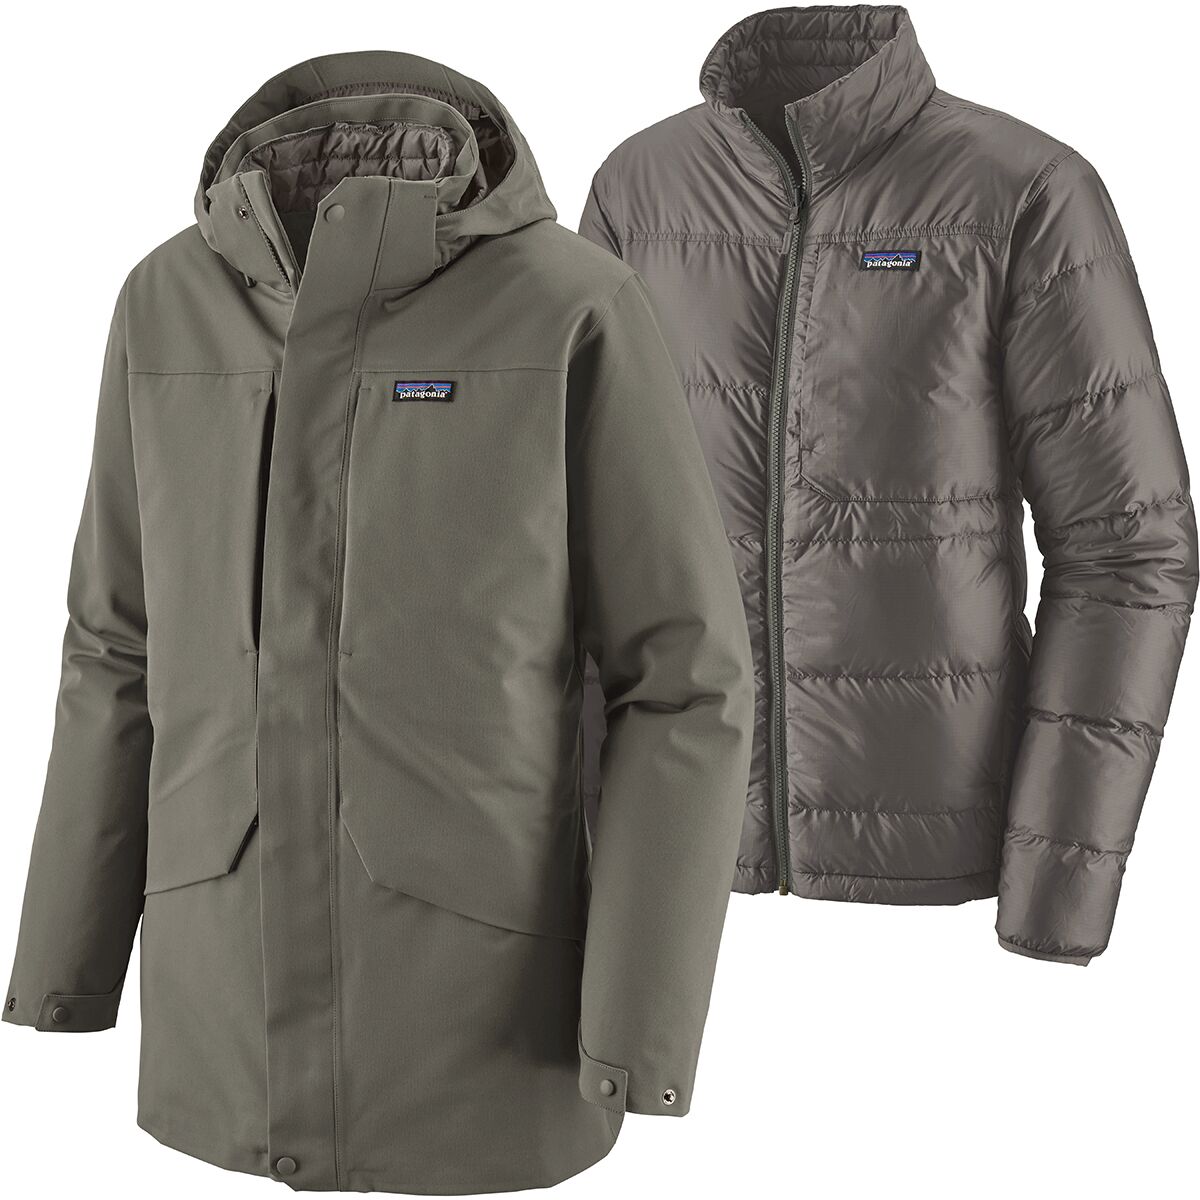 Patagonia Tres 3-in-1 Parka - Men's | Backcountry.com